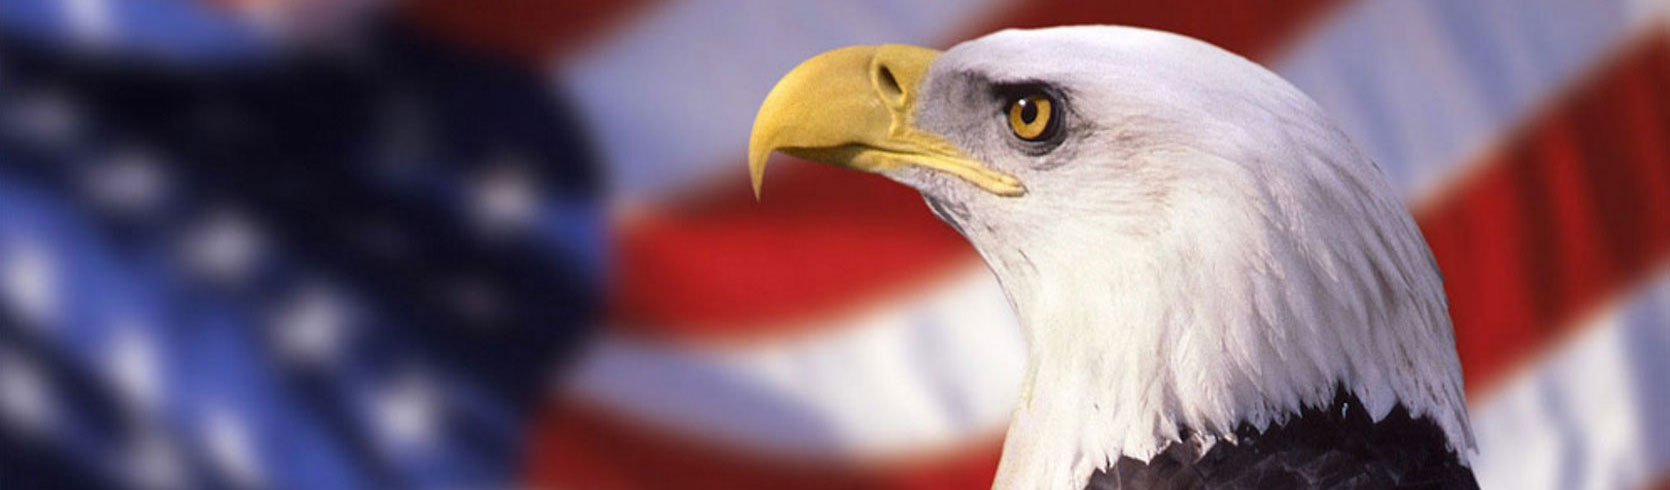 AST-Image-of-Eagle-and-Flag-resized-2